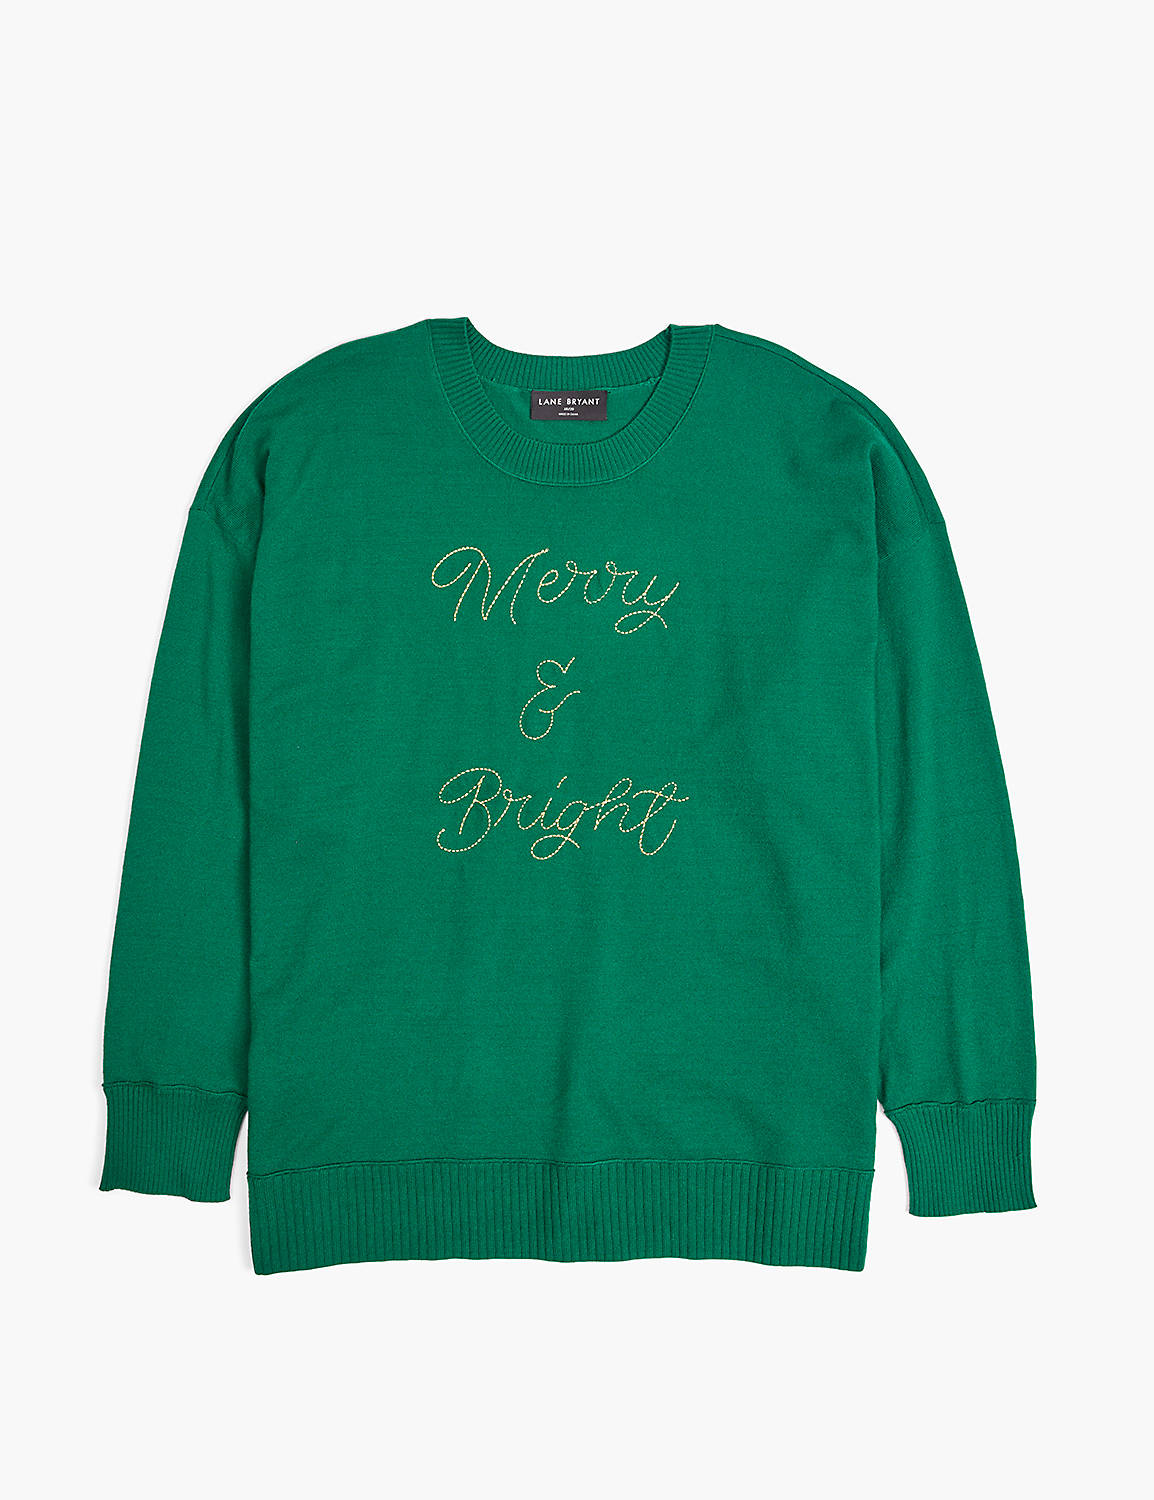 Classic Long Sleeve Open Crew Neck Product Image 1